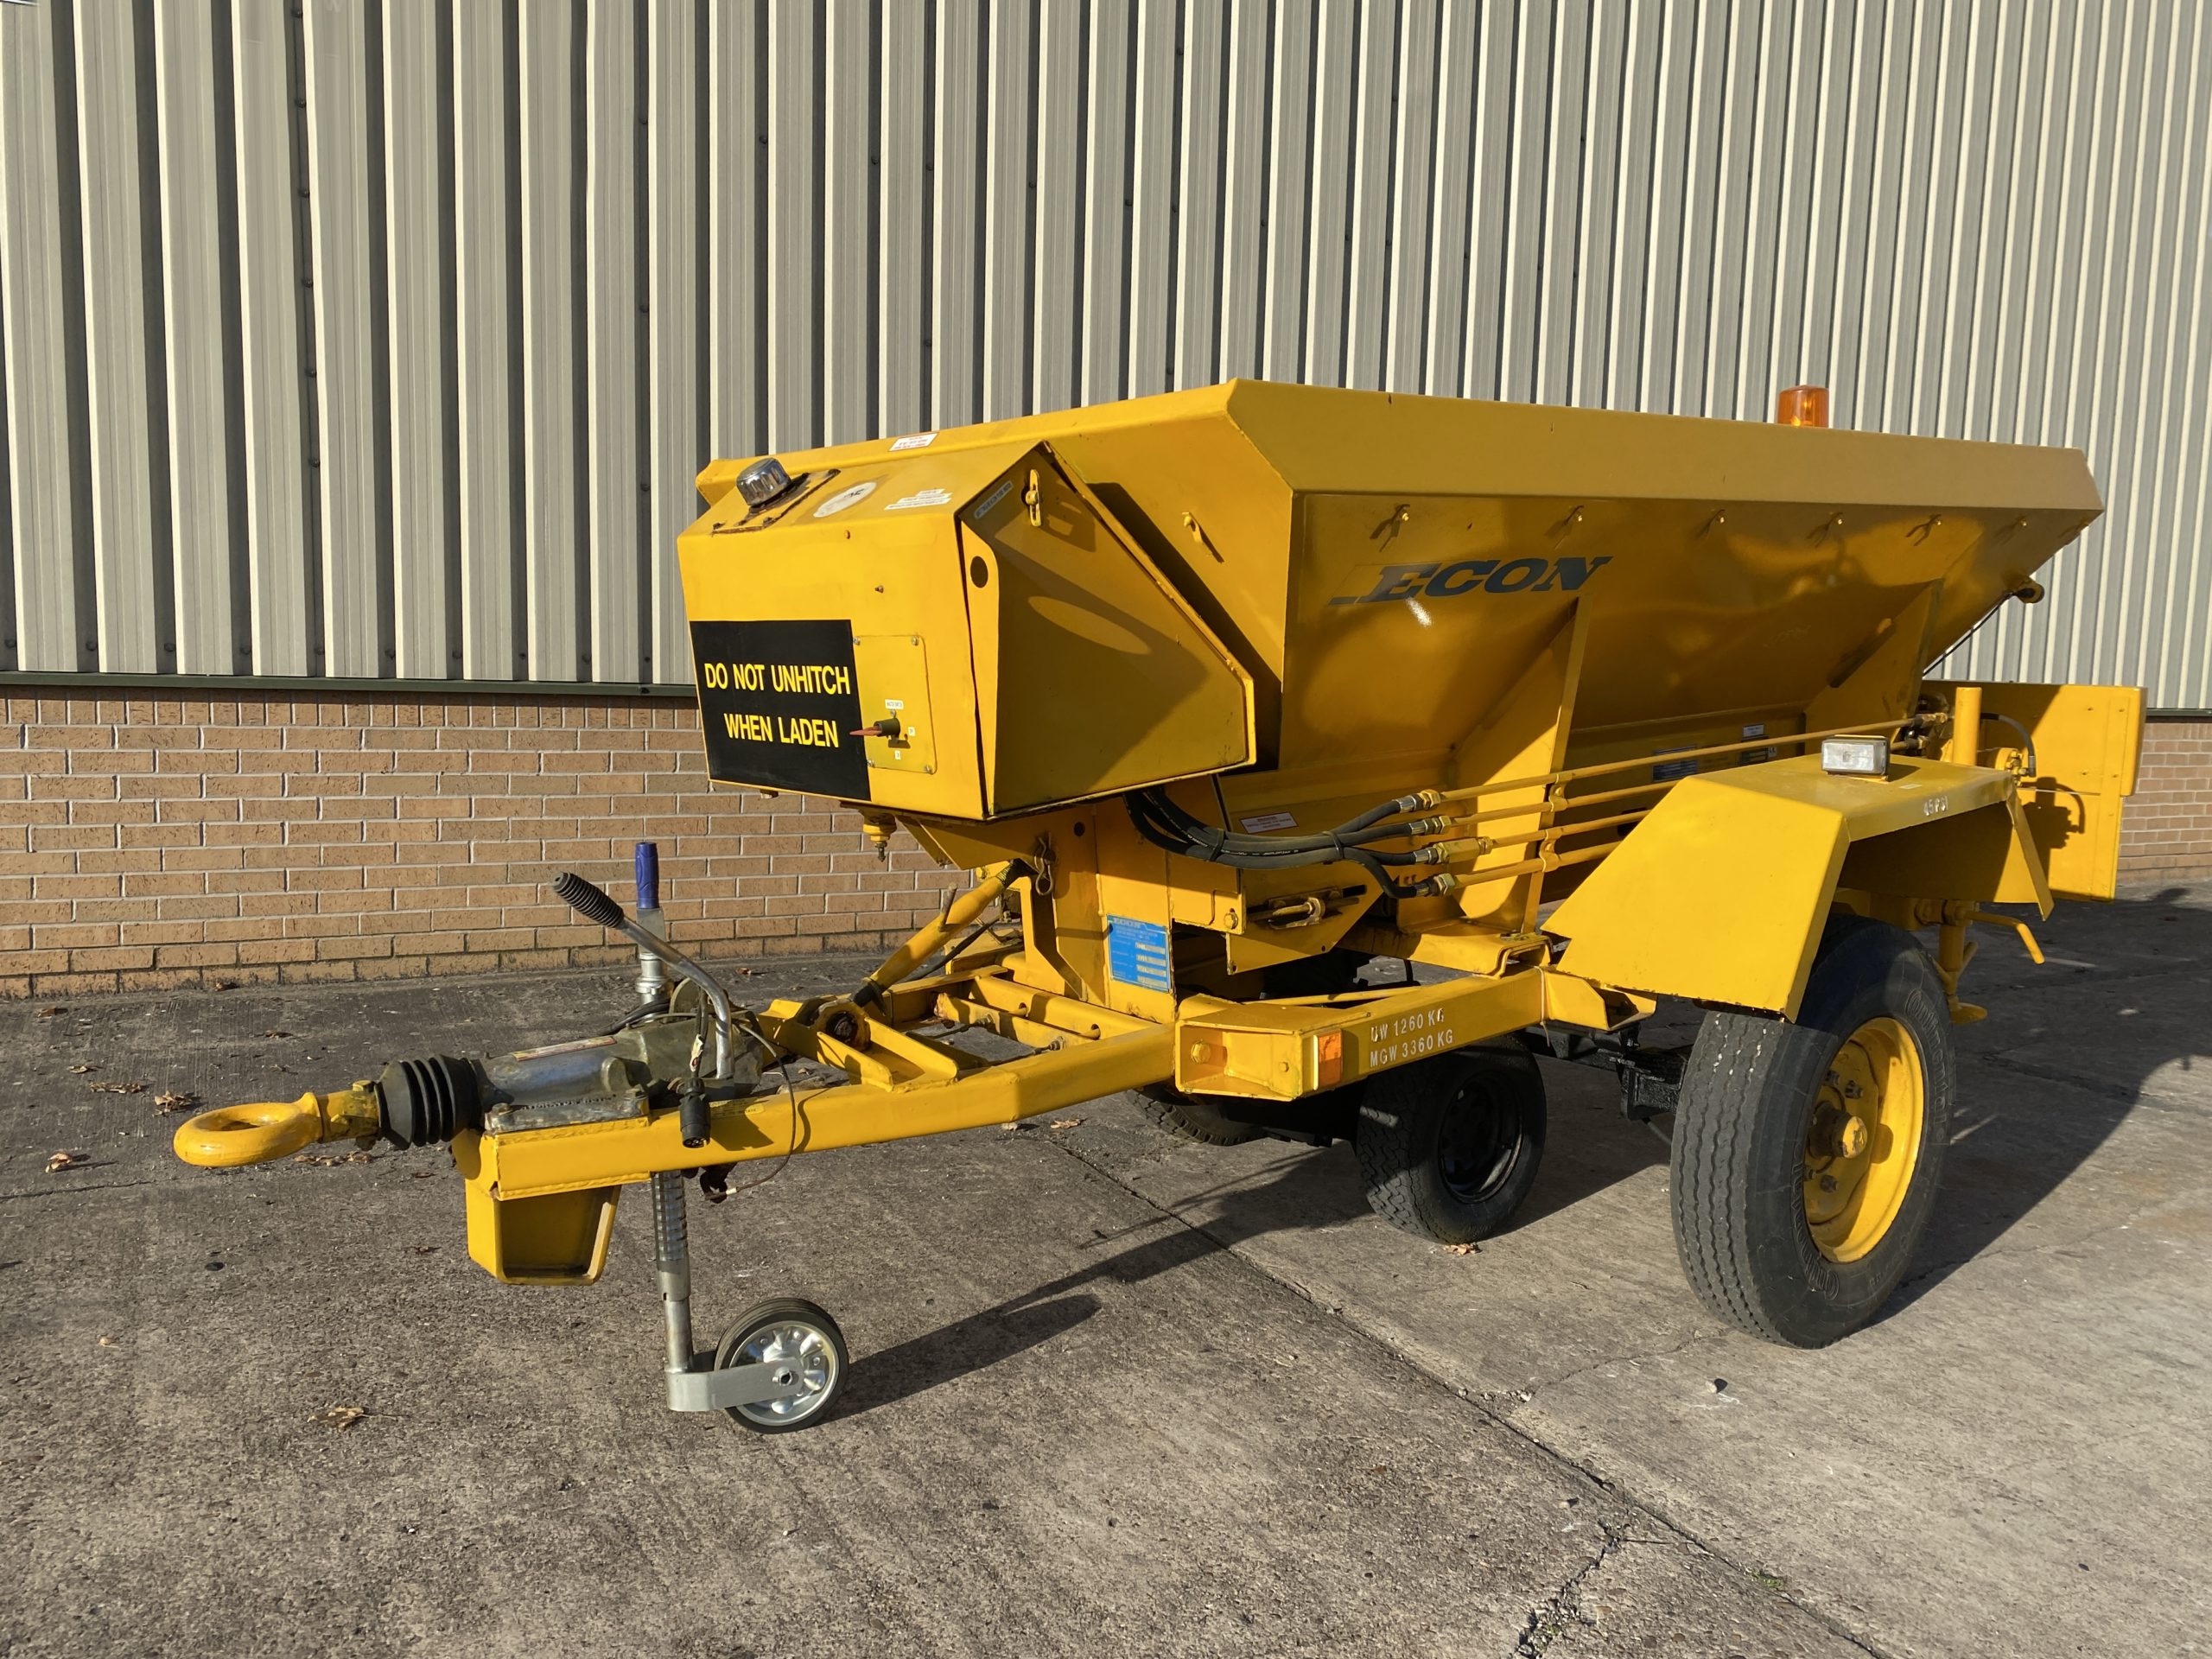 military vehicles for sale - Econ towed gritter trailer